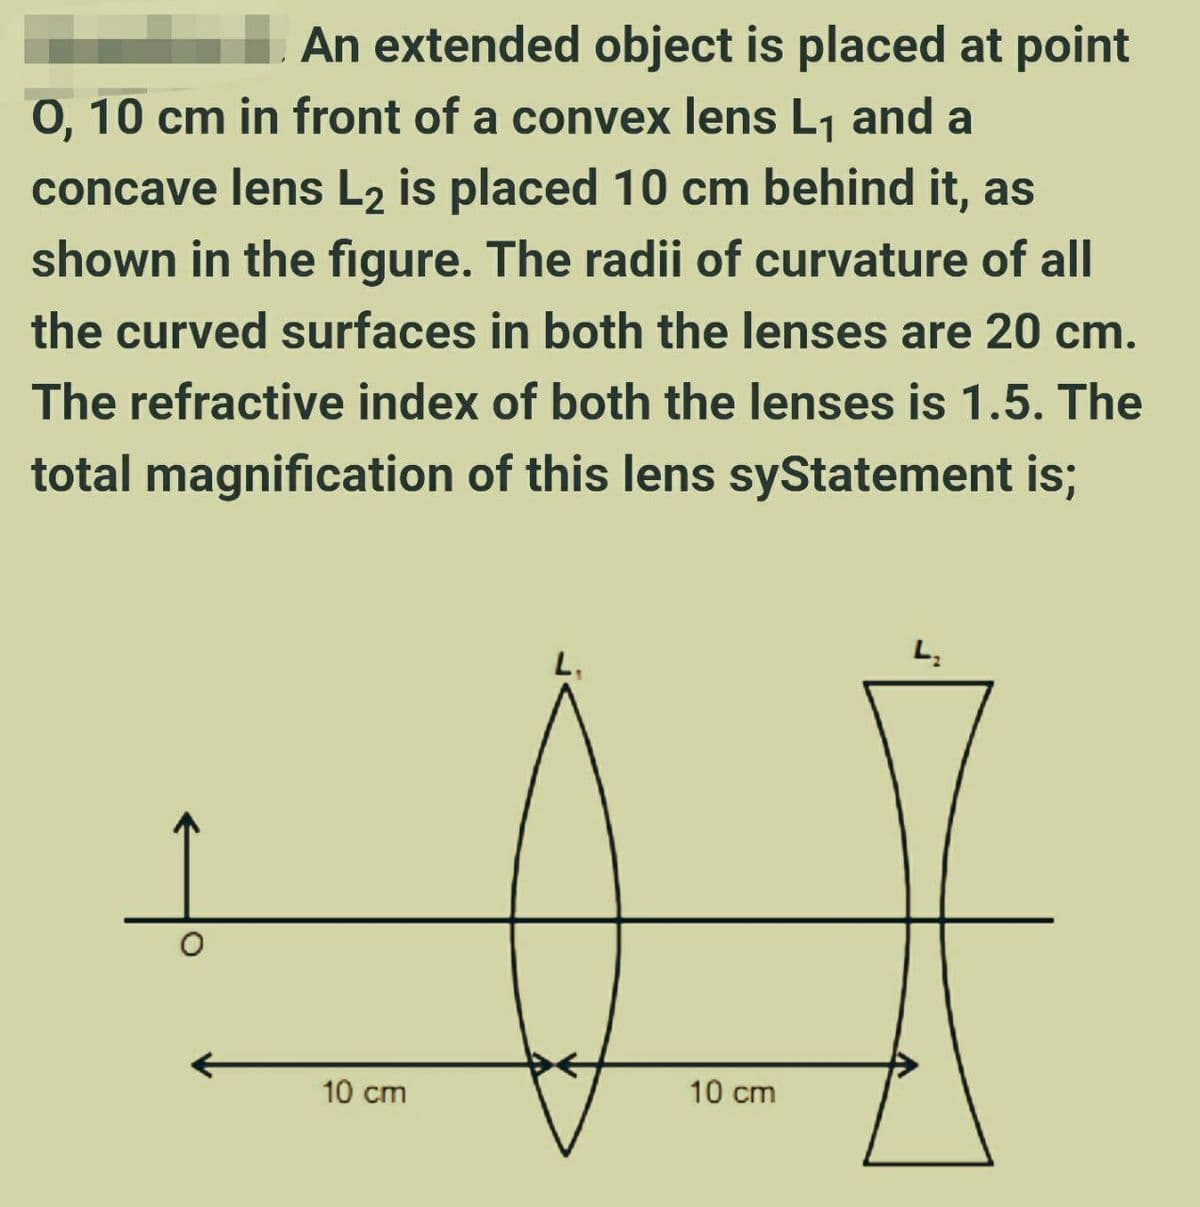 An extended object is placed at point
0, 10 cm in front of a convex lens L1 and a
concave lens L2 is placed 10 cm behind it, as
shown in the figure. The radii of curvature of all
the curved surfaces in both the lenses are 20 cm.
The refractive index of both the lenses is 1.5. The
total magnification of this lens syStatement is;
L,
10 cm
10 cm
